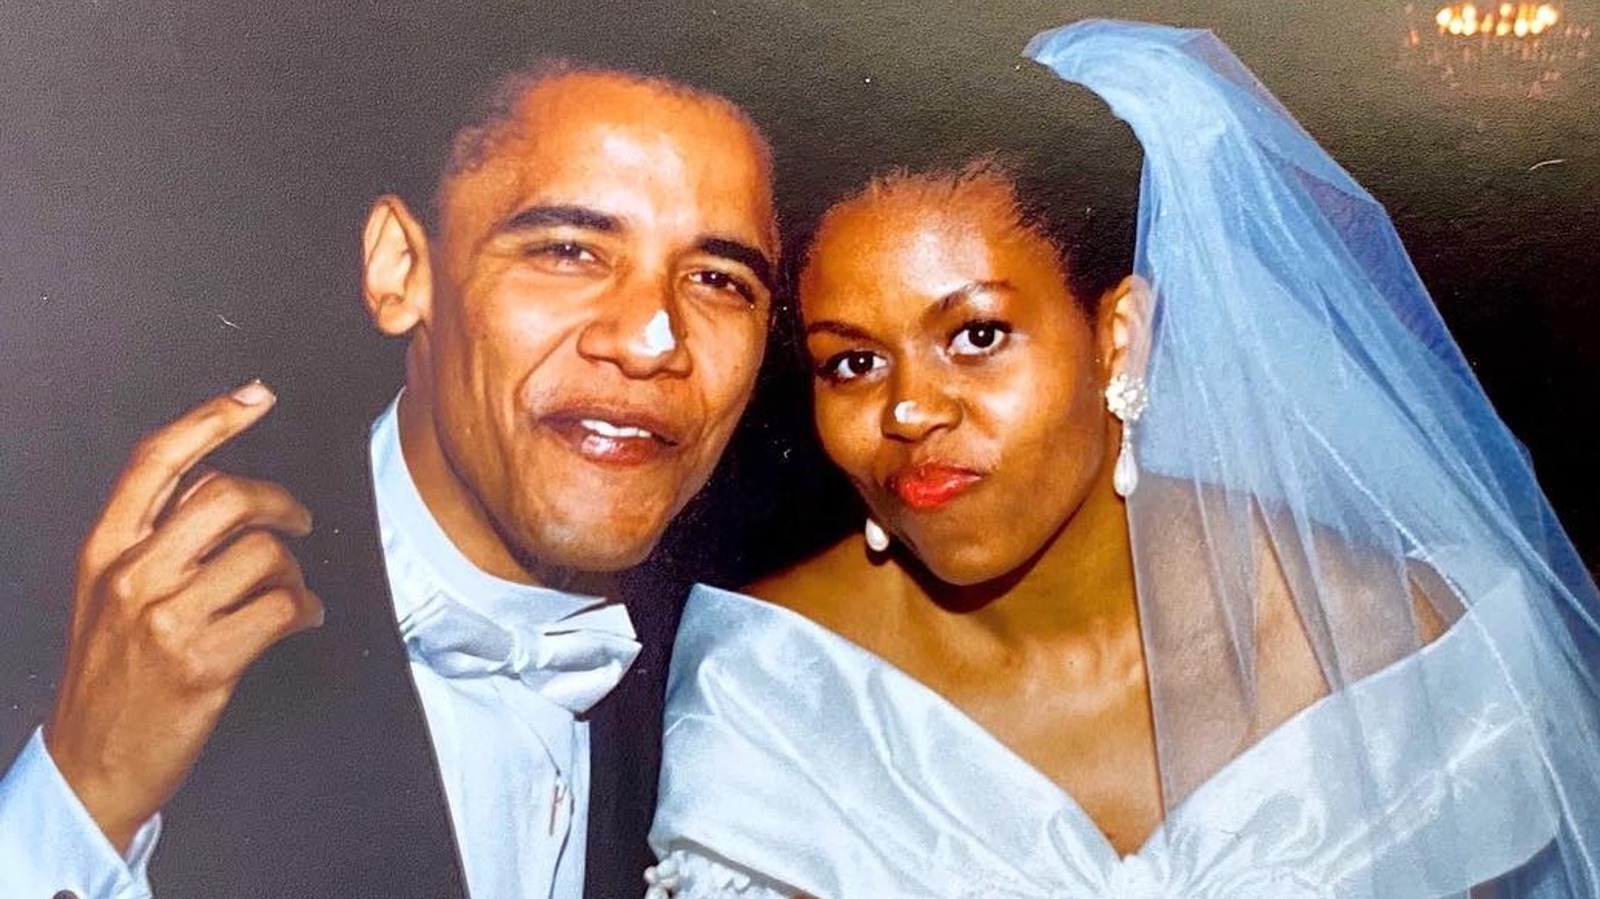 The Promise Barack Obama Made To Michelle During Their Wedding Vows